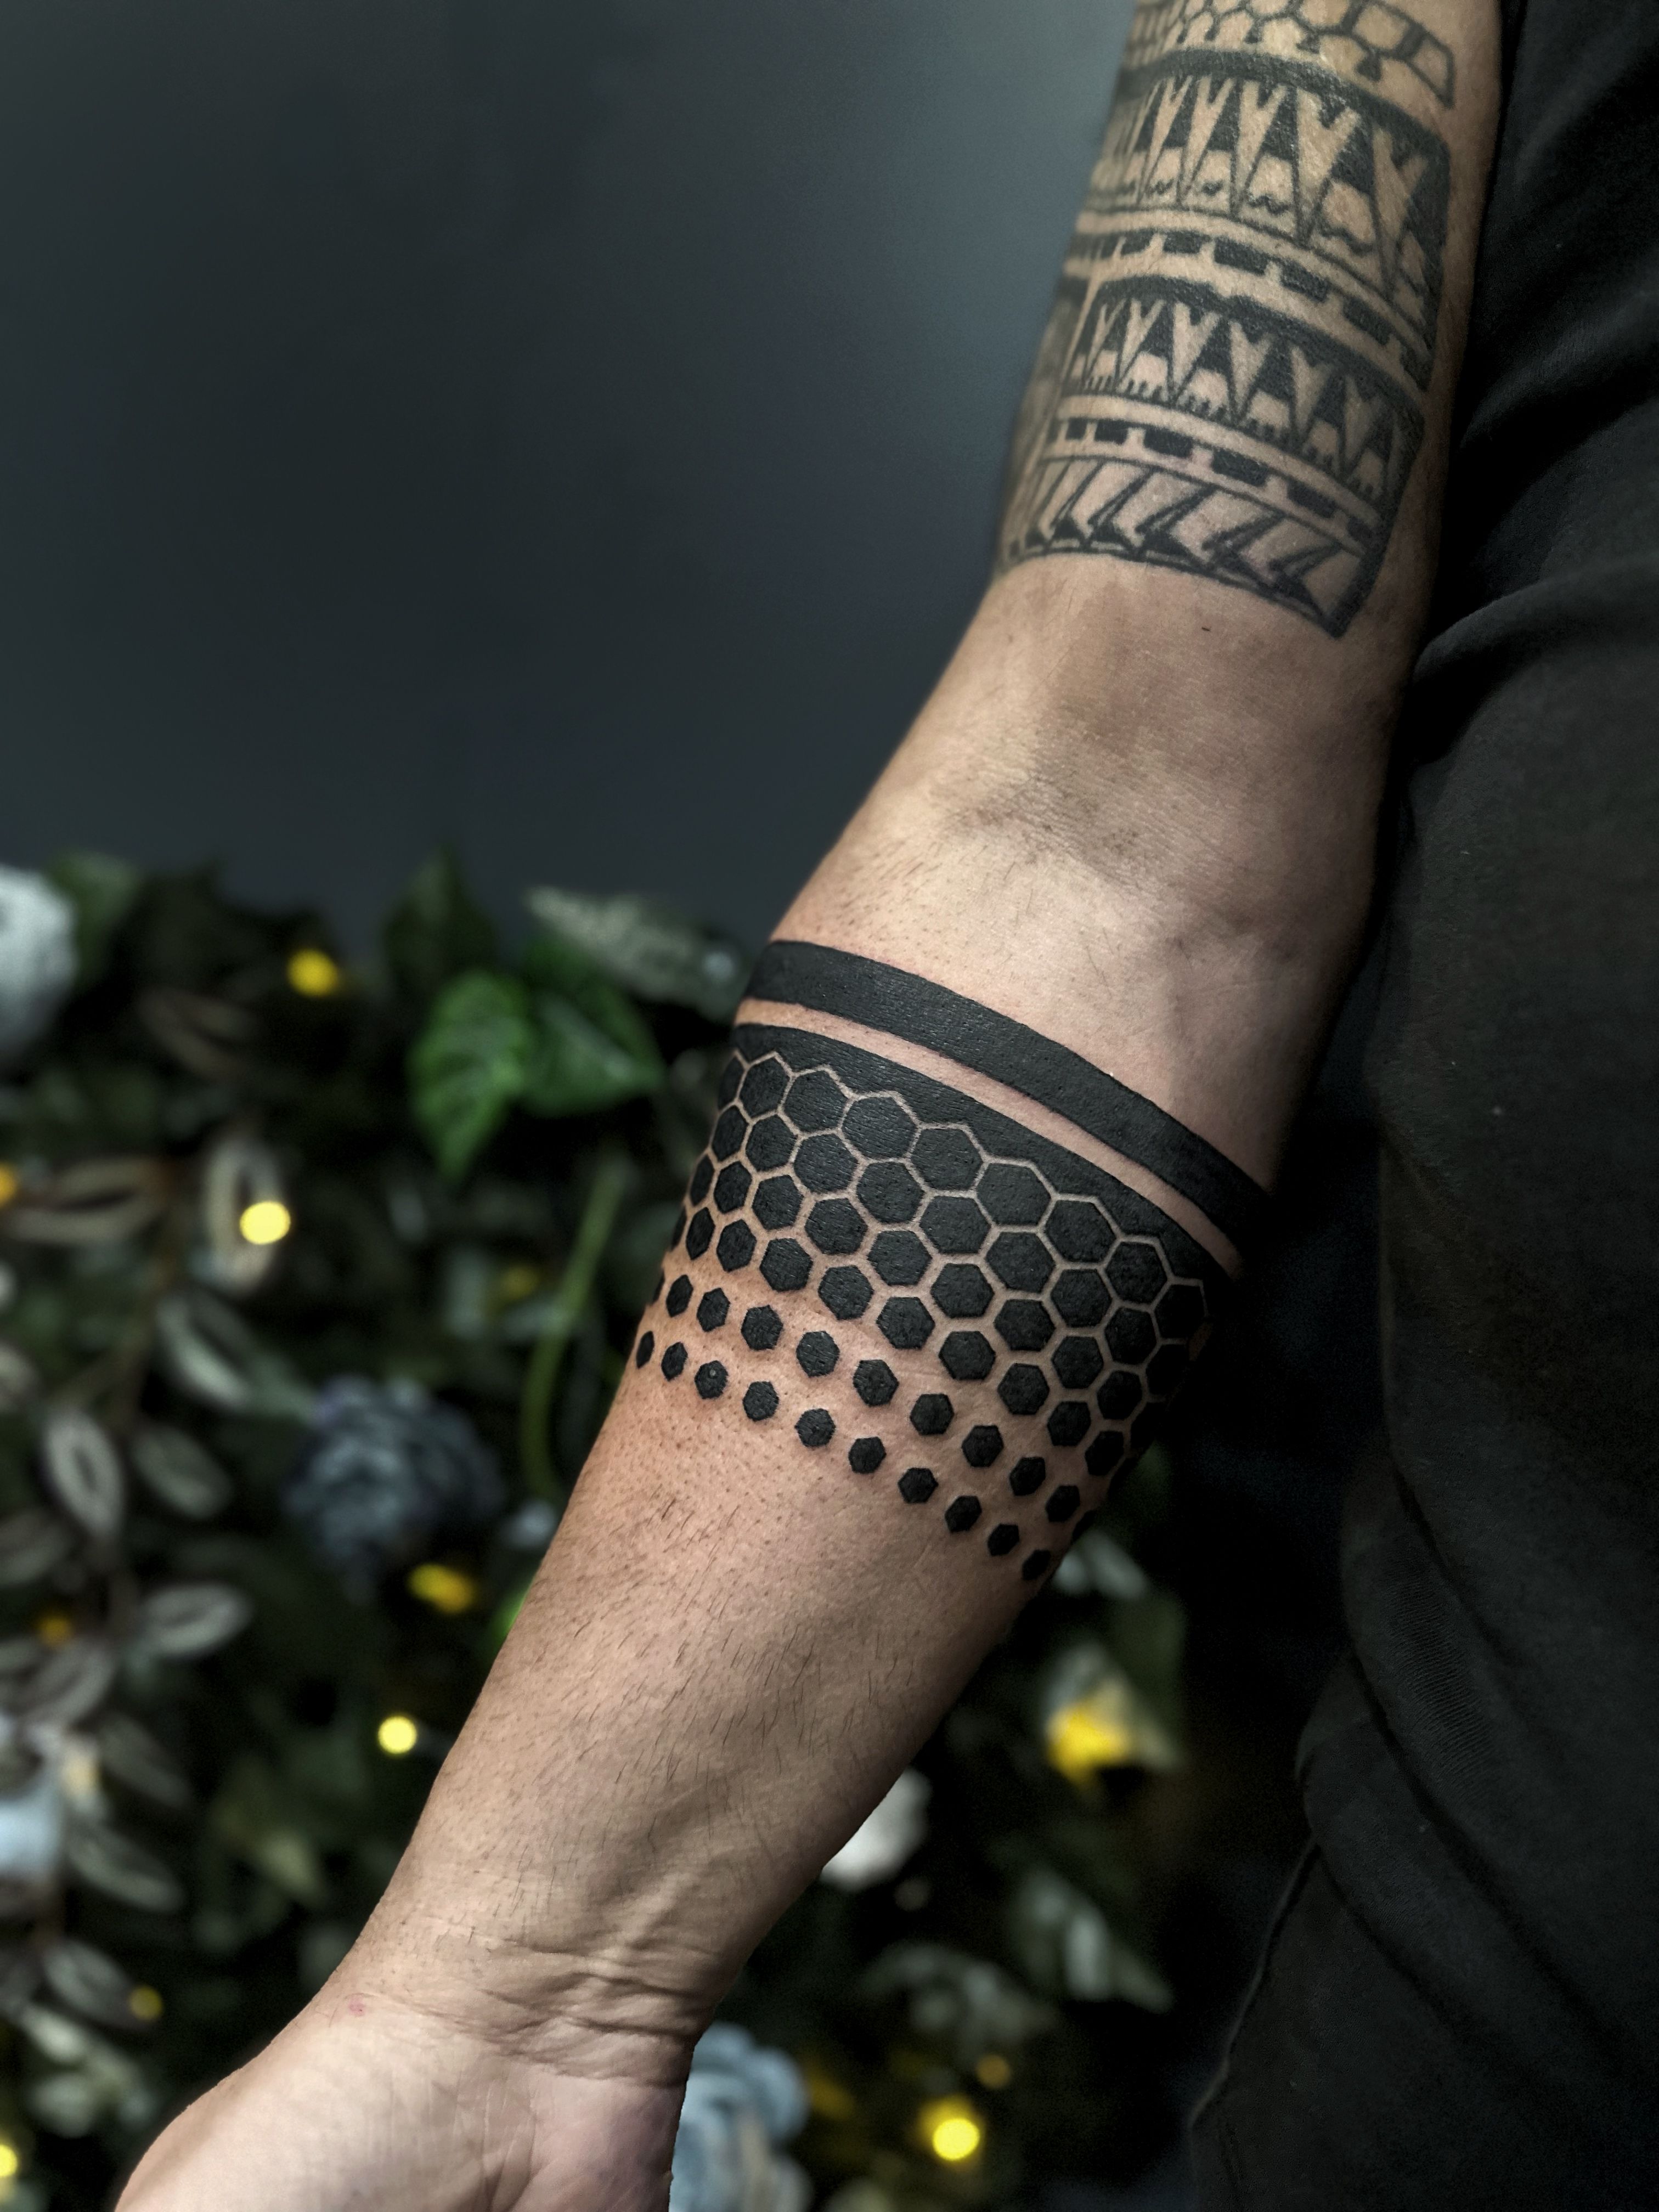 Polygon style pineapple tattoo on the inner arm.